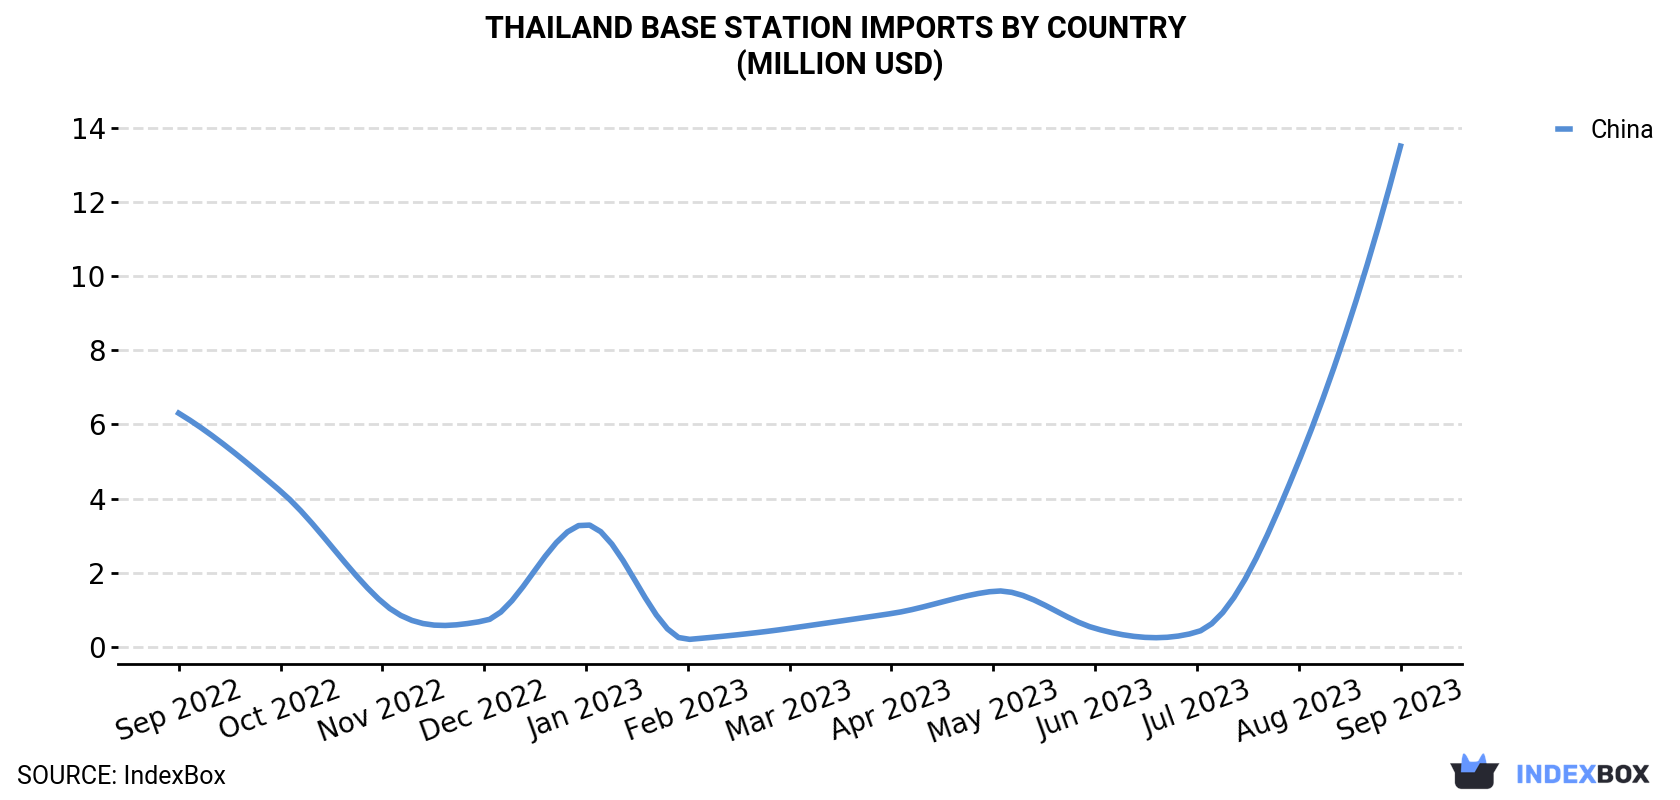 Thailand Base Station Imports By Country (Million USD)